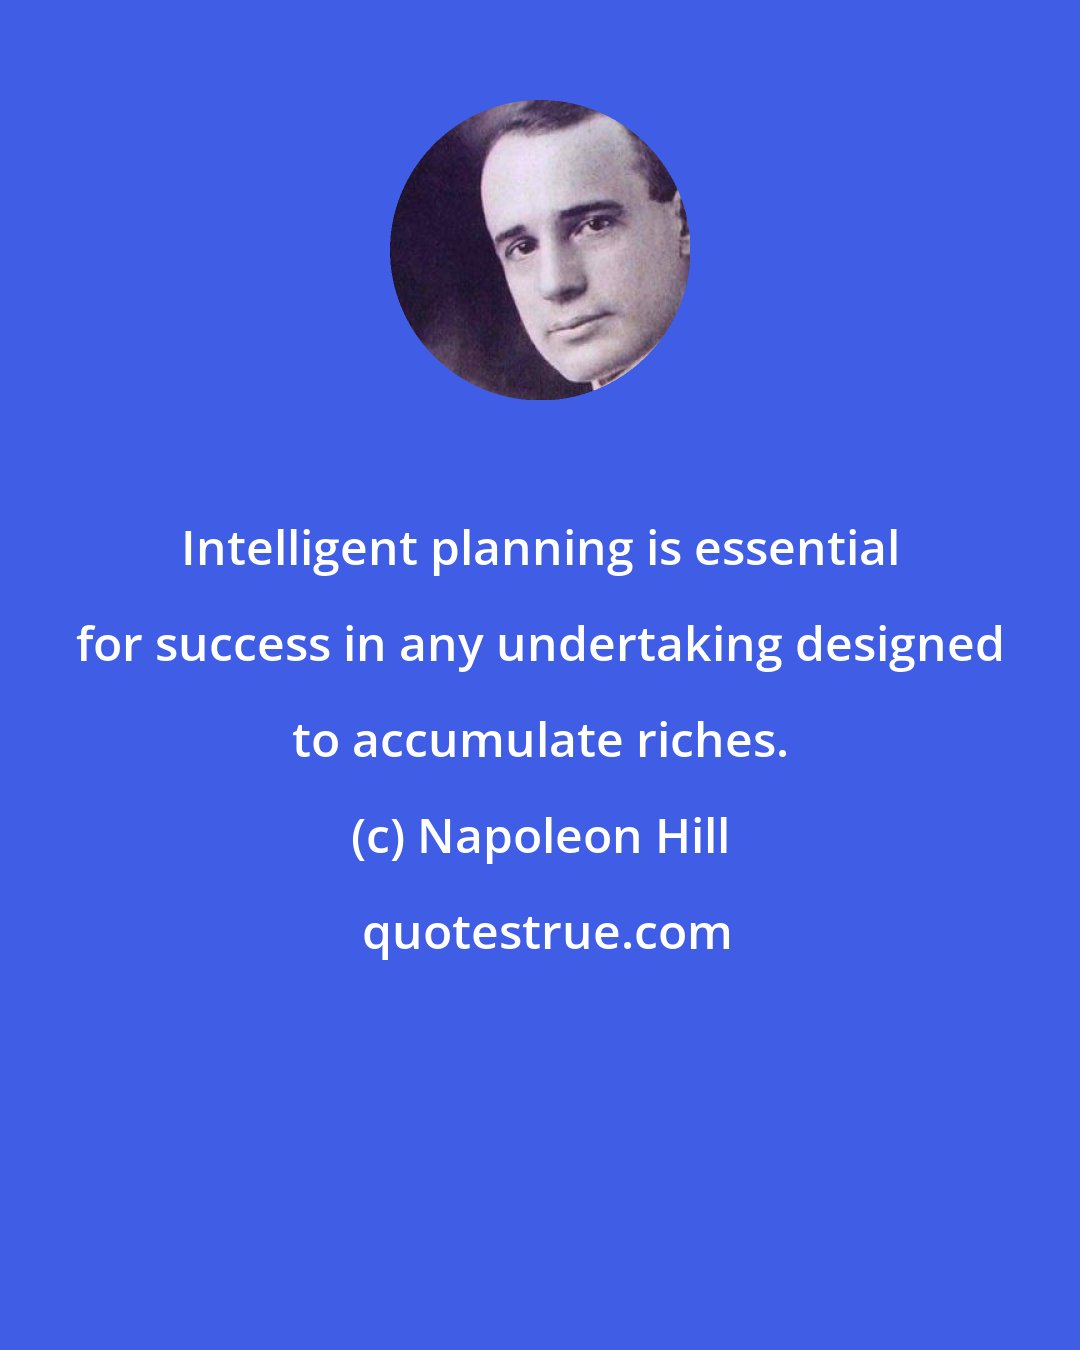 Napoleon Hill: Intelligent planning is essential for success in any undertaking designed to accumulate riches.